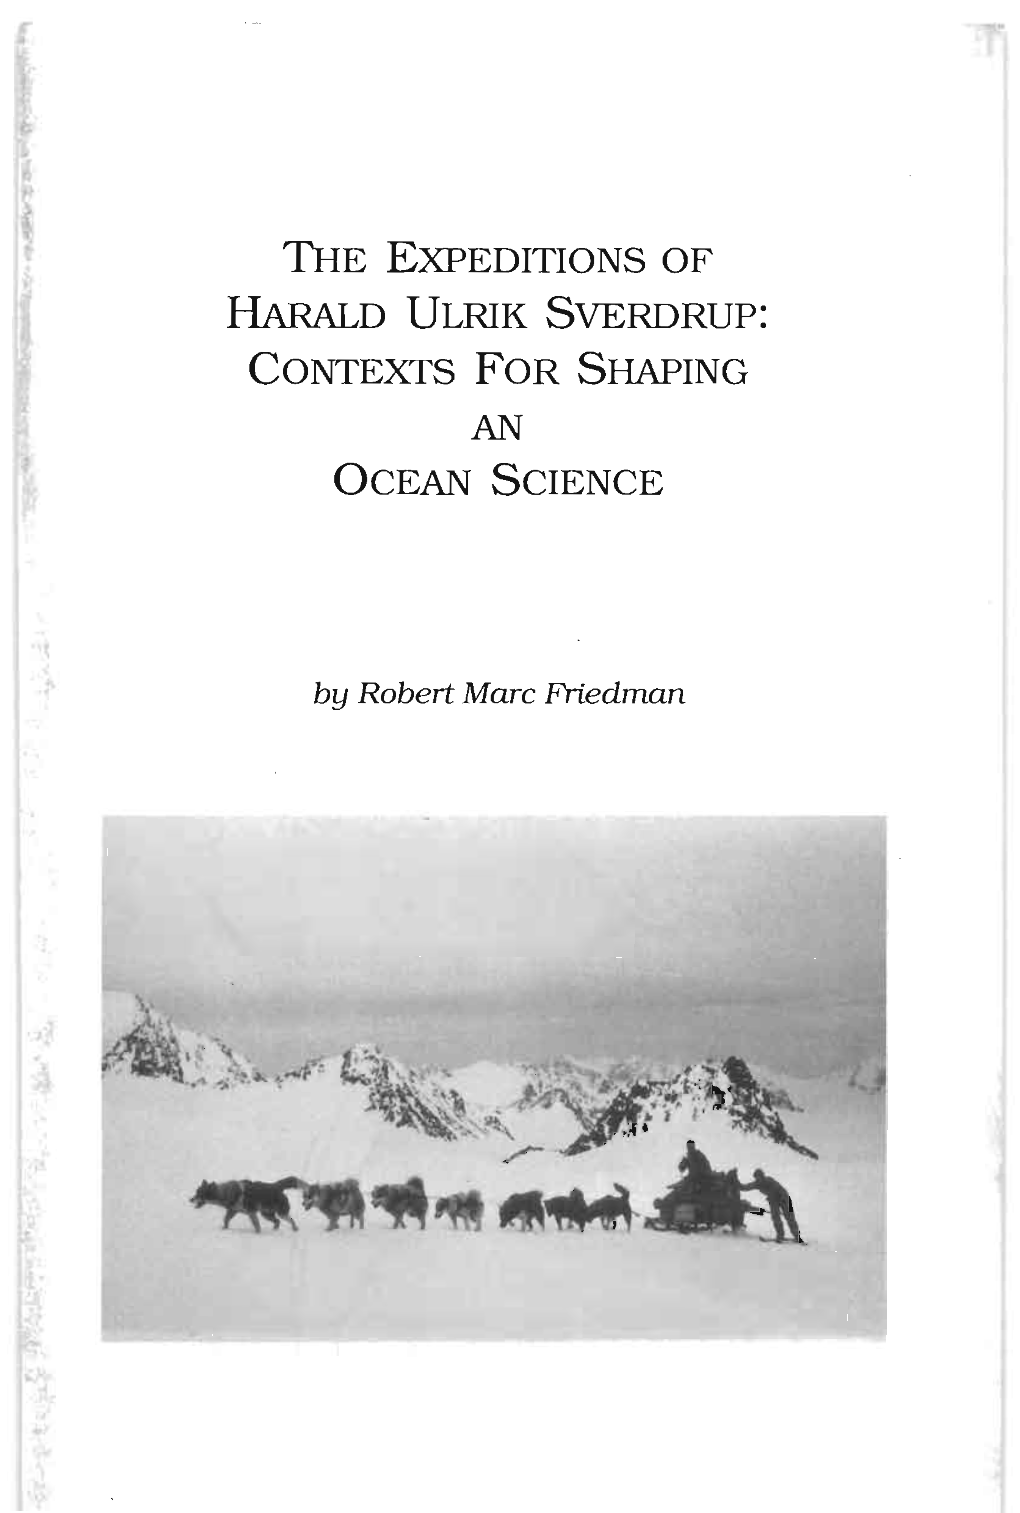 The Expeditions of Harald Ulrik Sverdrup: Contexts for Shaping an Ocean Science